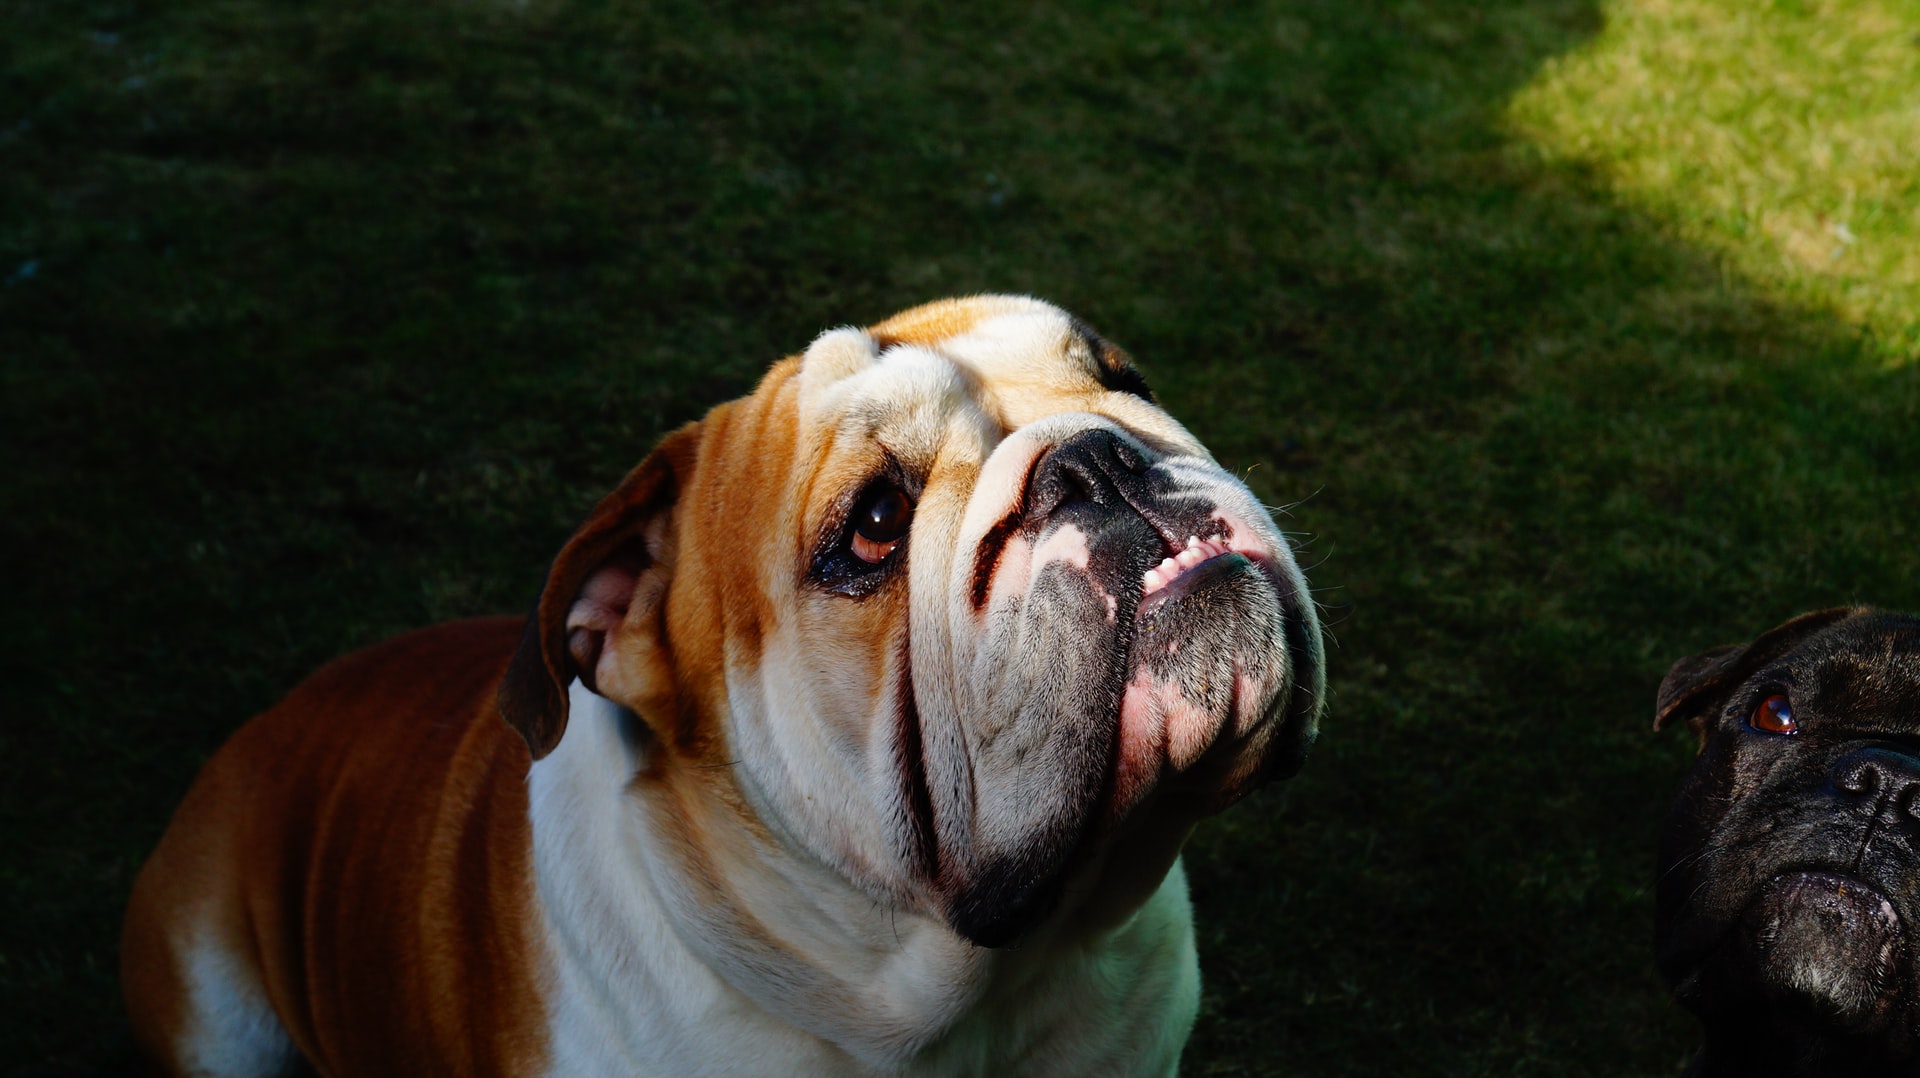 dentigerous cysts in dogs - bulldog